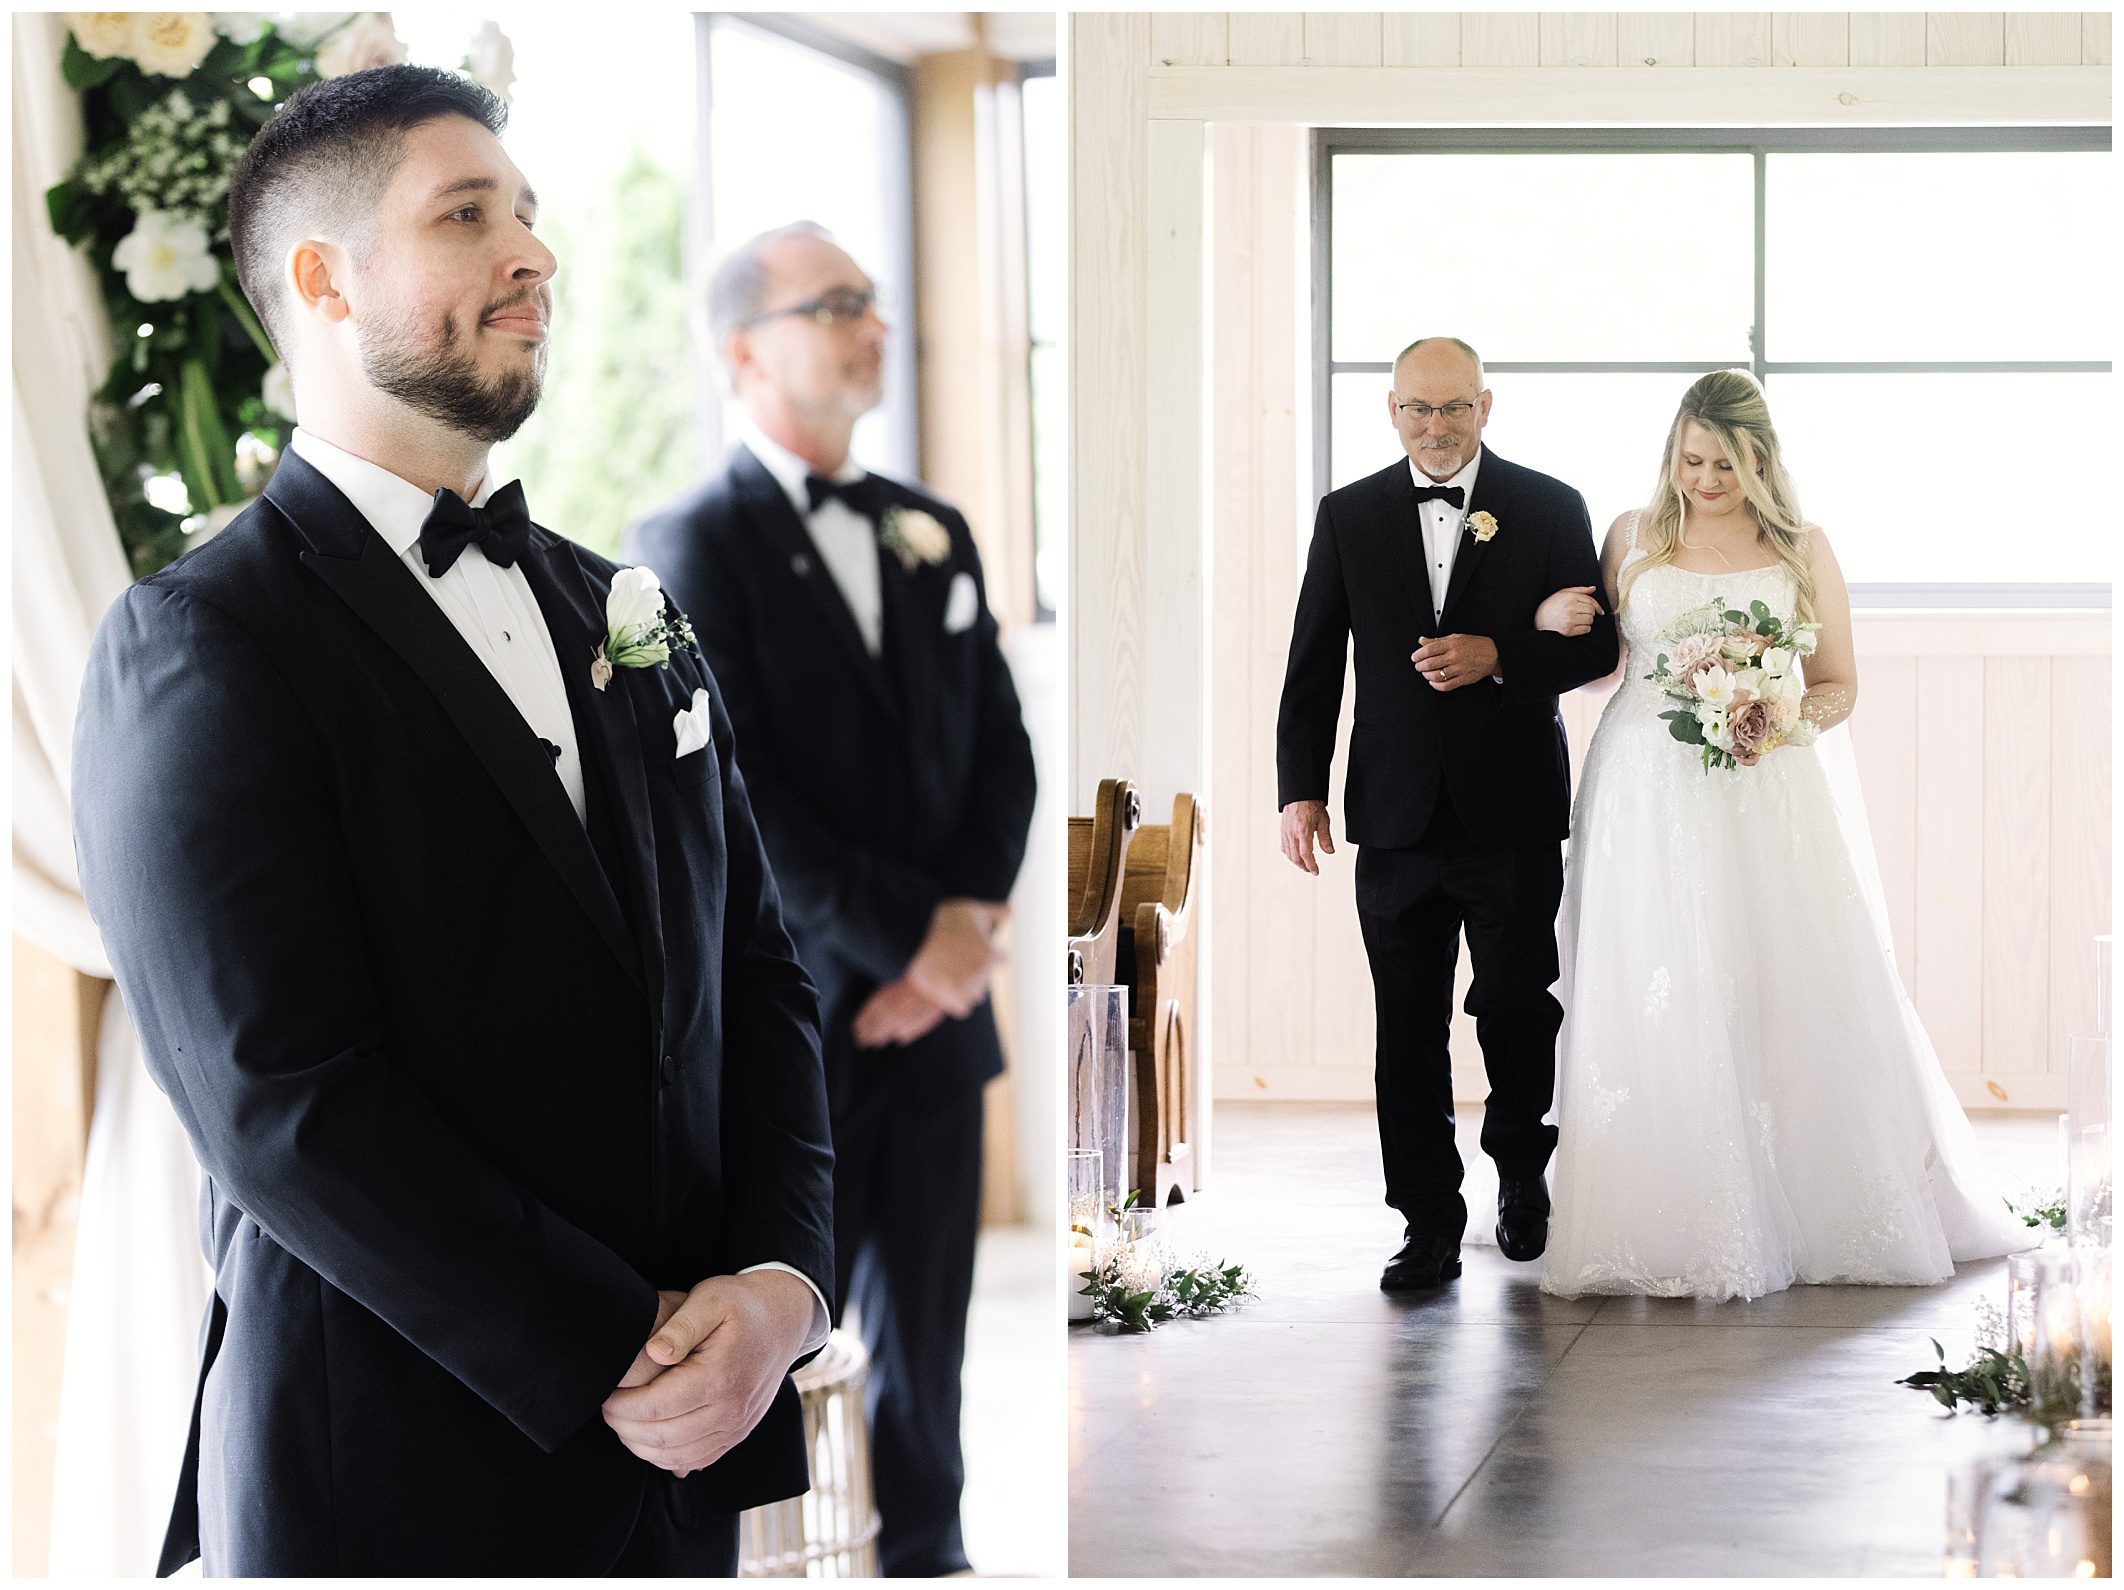 Groom in a black tuxedo smiles gently, waiting at the altar, while the bride, guided by her father, walks down the aisle in a white dress, both at a mountain wedding venue.